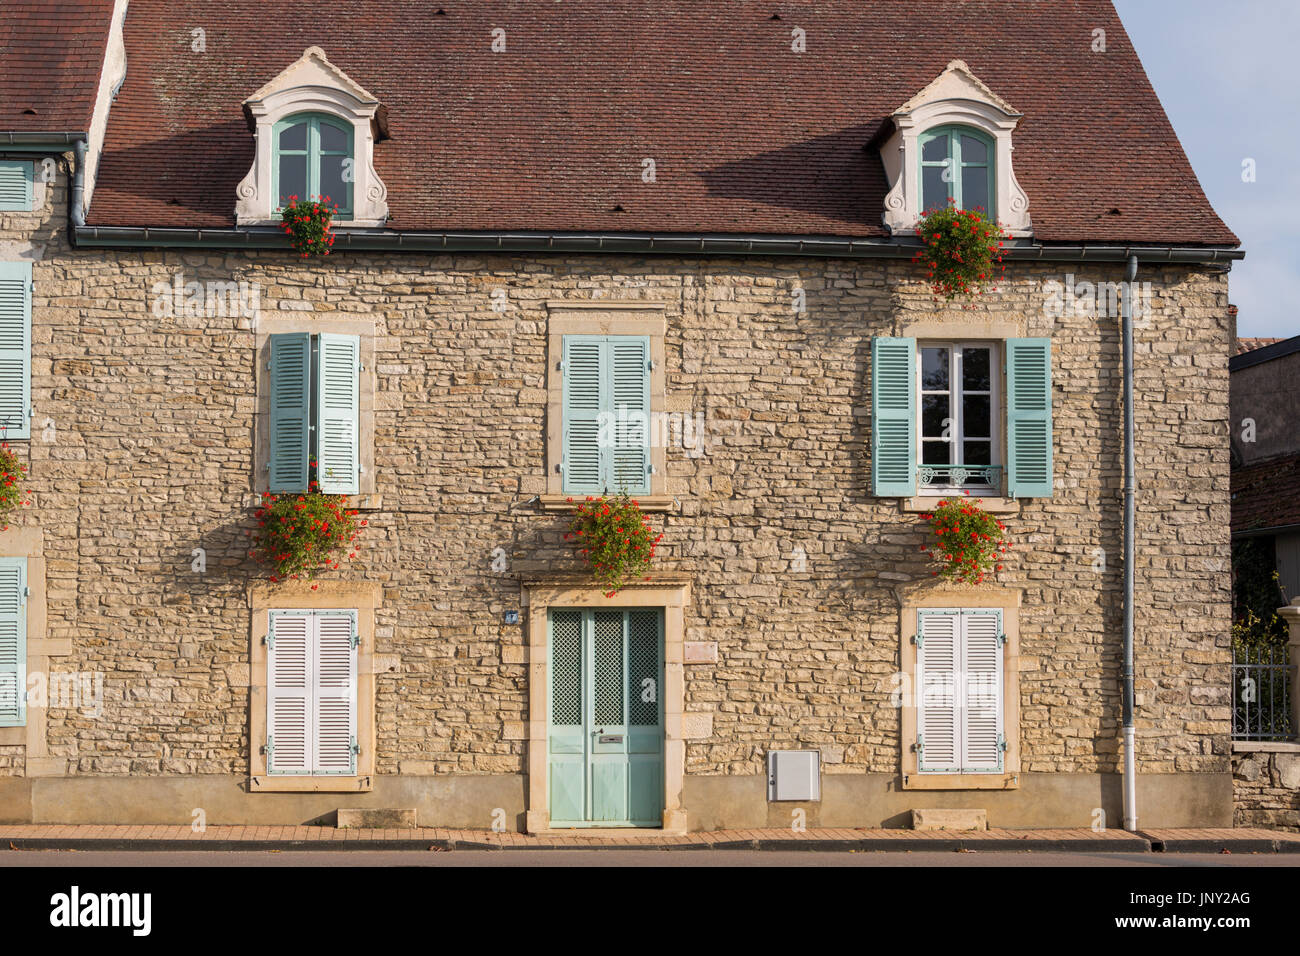 Beaune, Burgundy, France - October 11, 2015: Stone house with pale green shutters and red geraniums in window boxes, Beaune, Burgundy, France Stock Photo